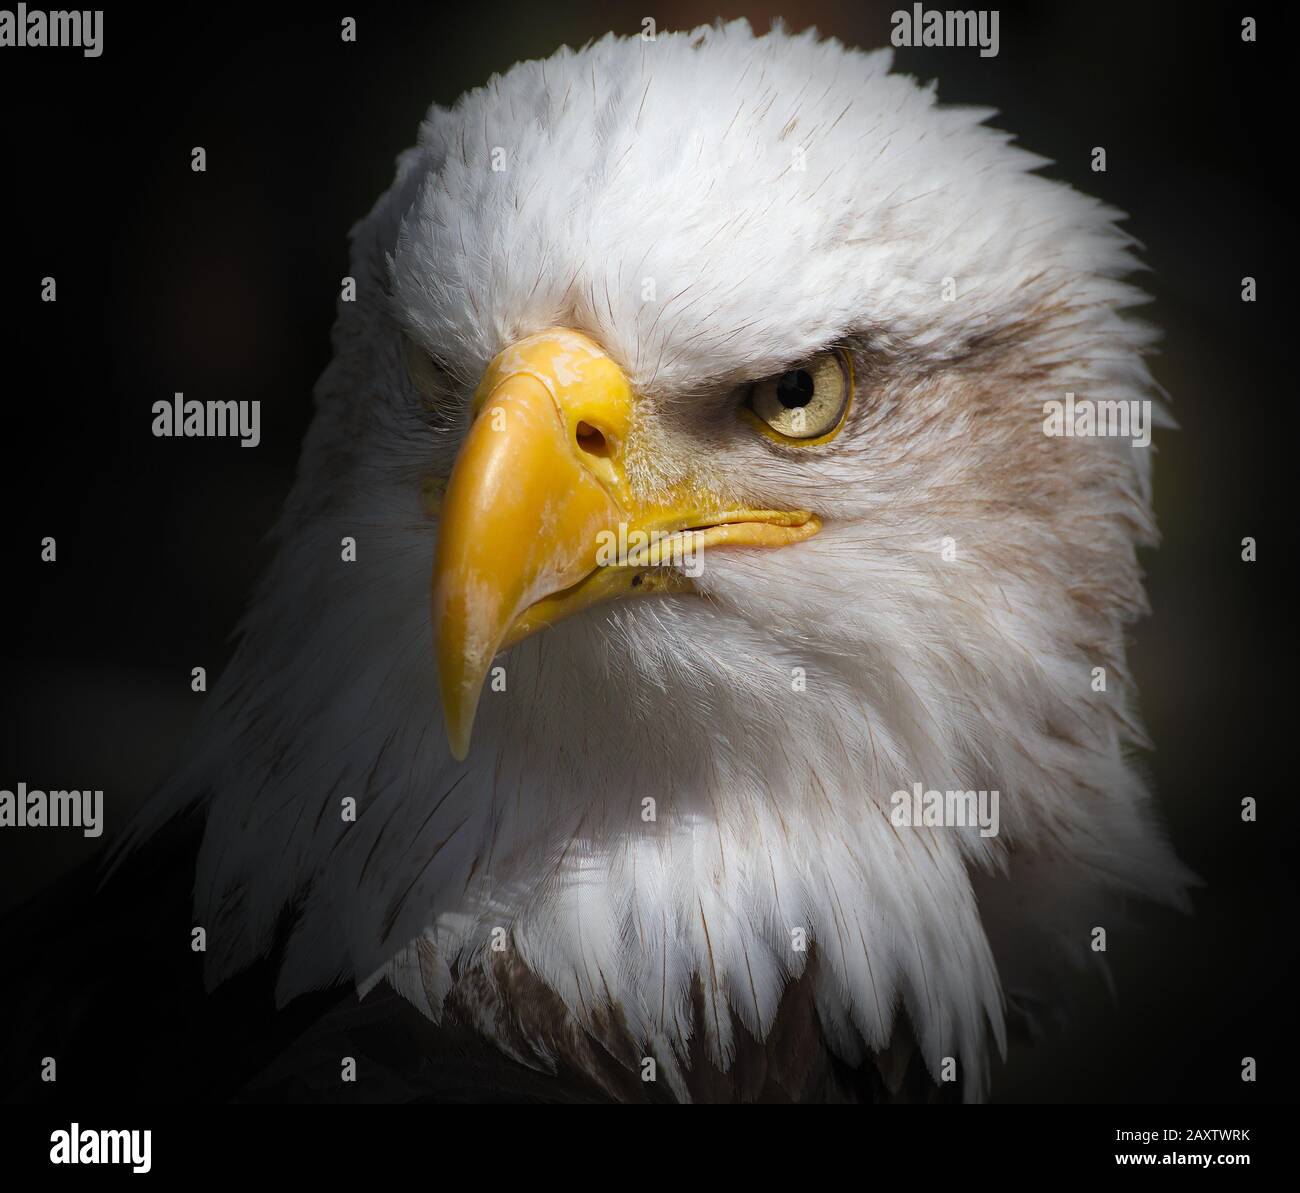 Head shot of a Bald Eagle, Haliaeetus leucocephalus, with an intense stare isolated on a black background Stock Photo